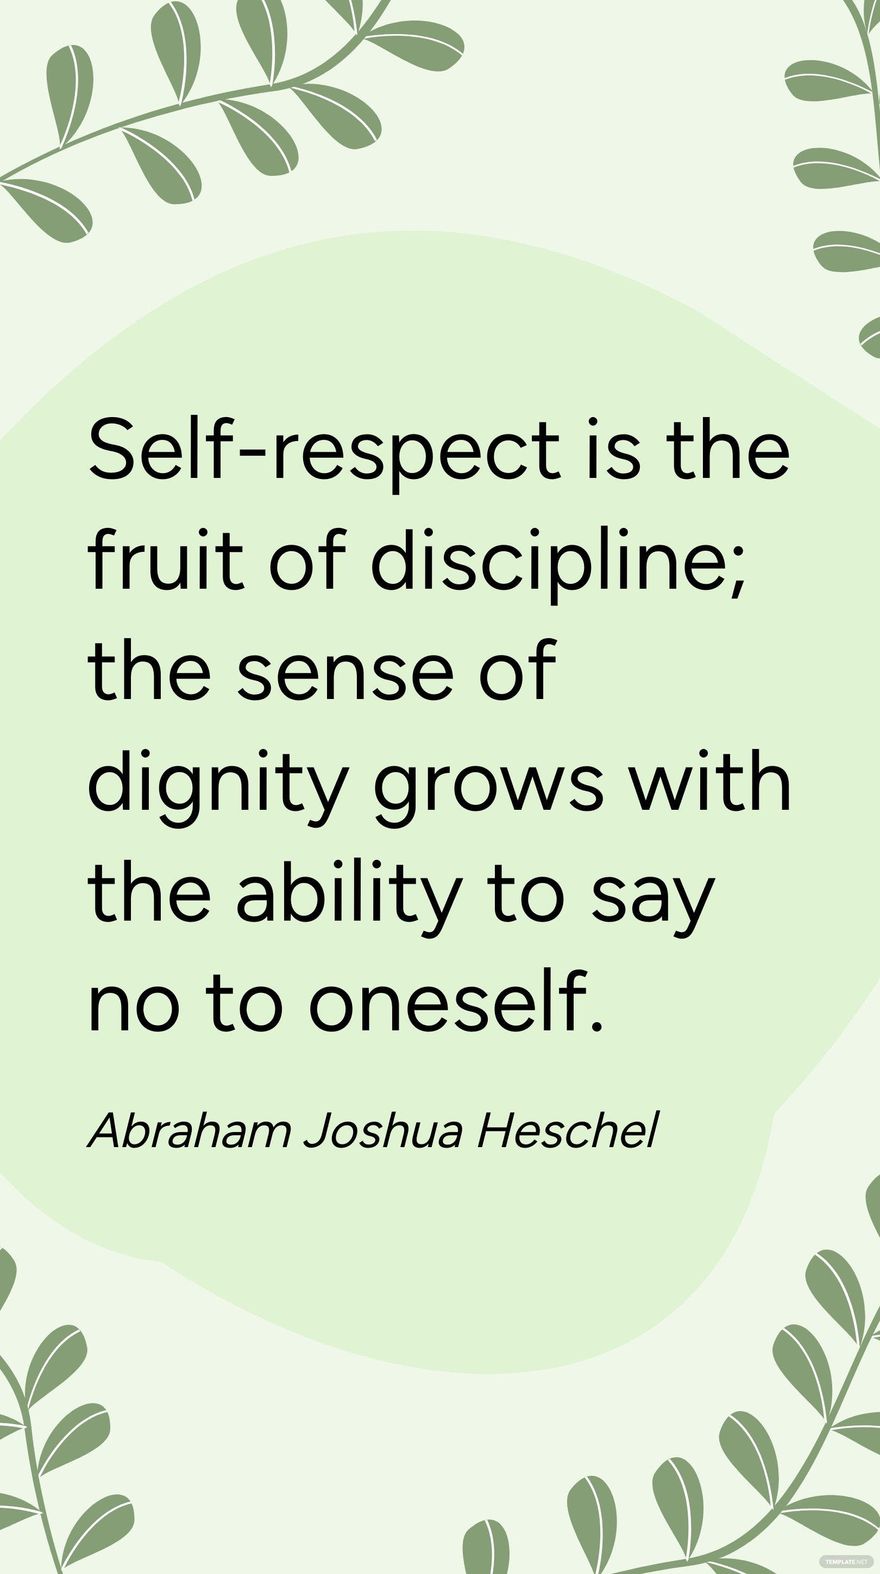 Abraham Joshua Heschel - Self-respect is the fruit of discipline; the sense of dignity grows with the ability to say no to oneself.